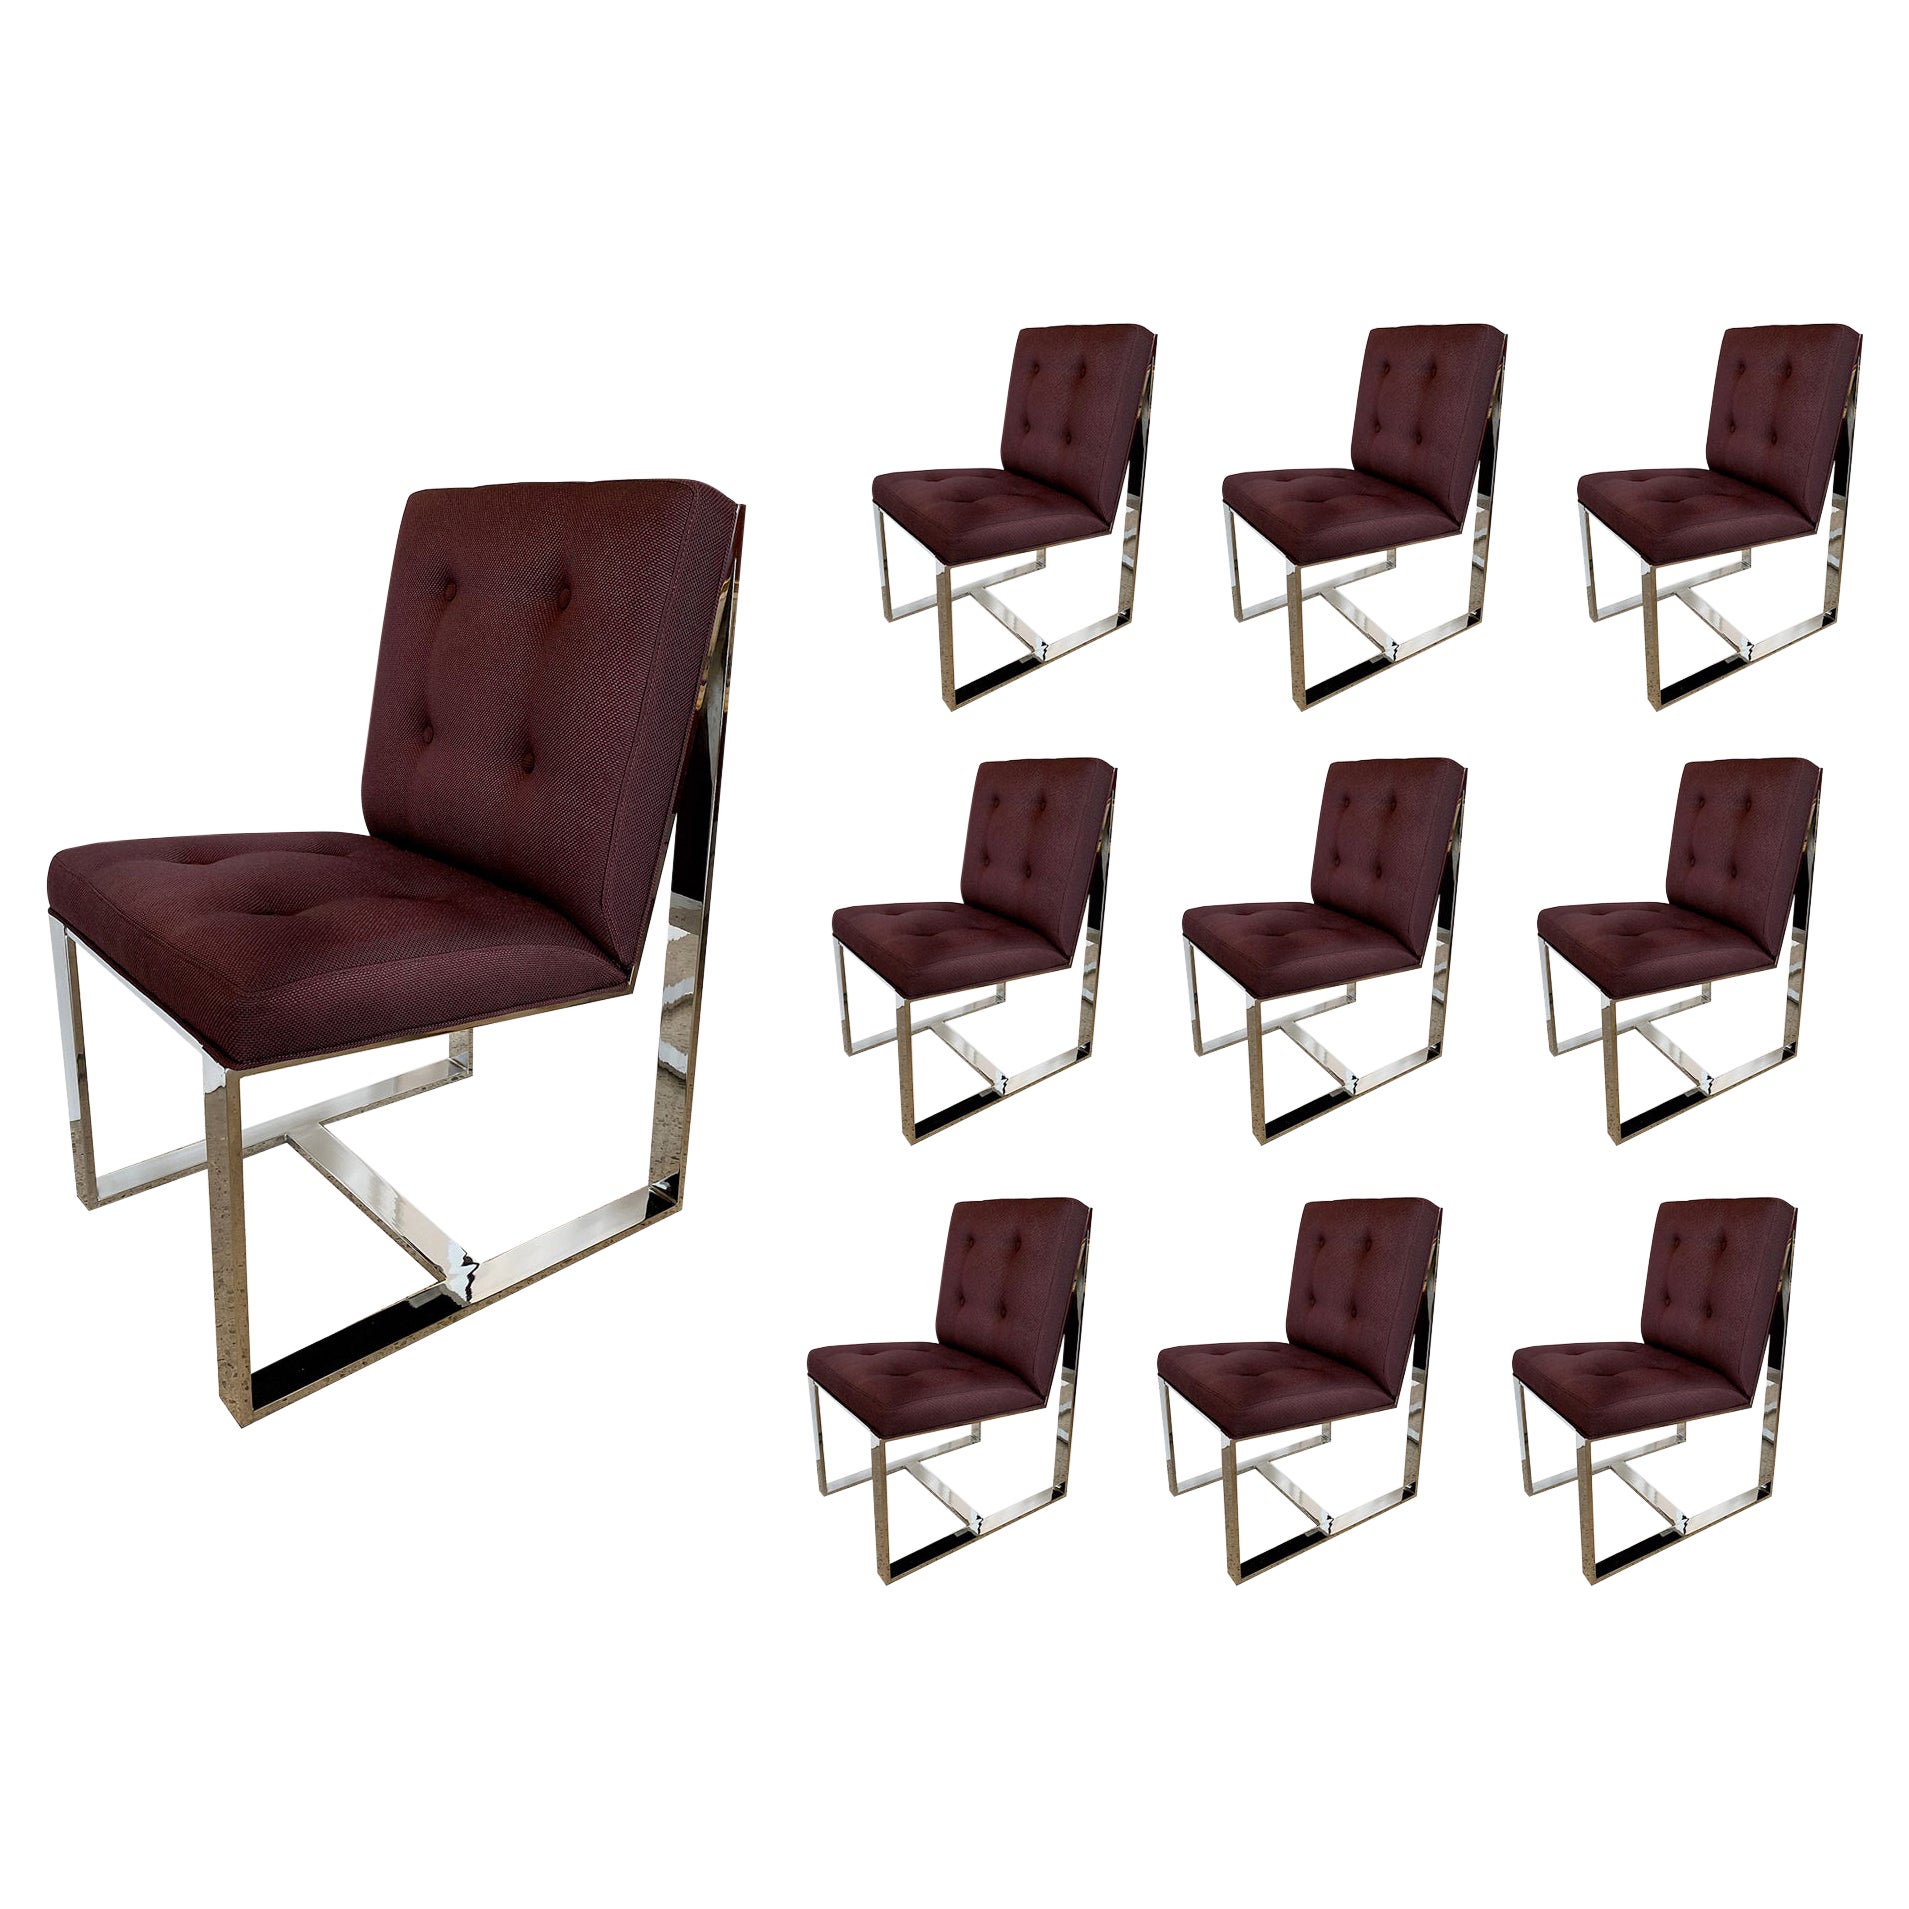 10 American Polished Stainless & Upholstered Dining Chairs, Milo Baughman For Sale